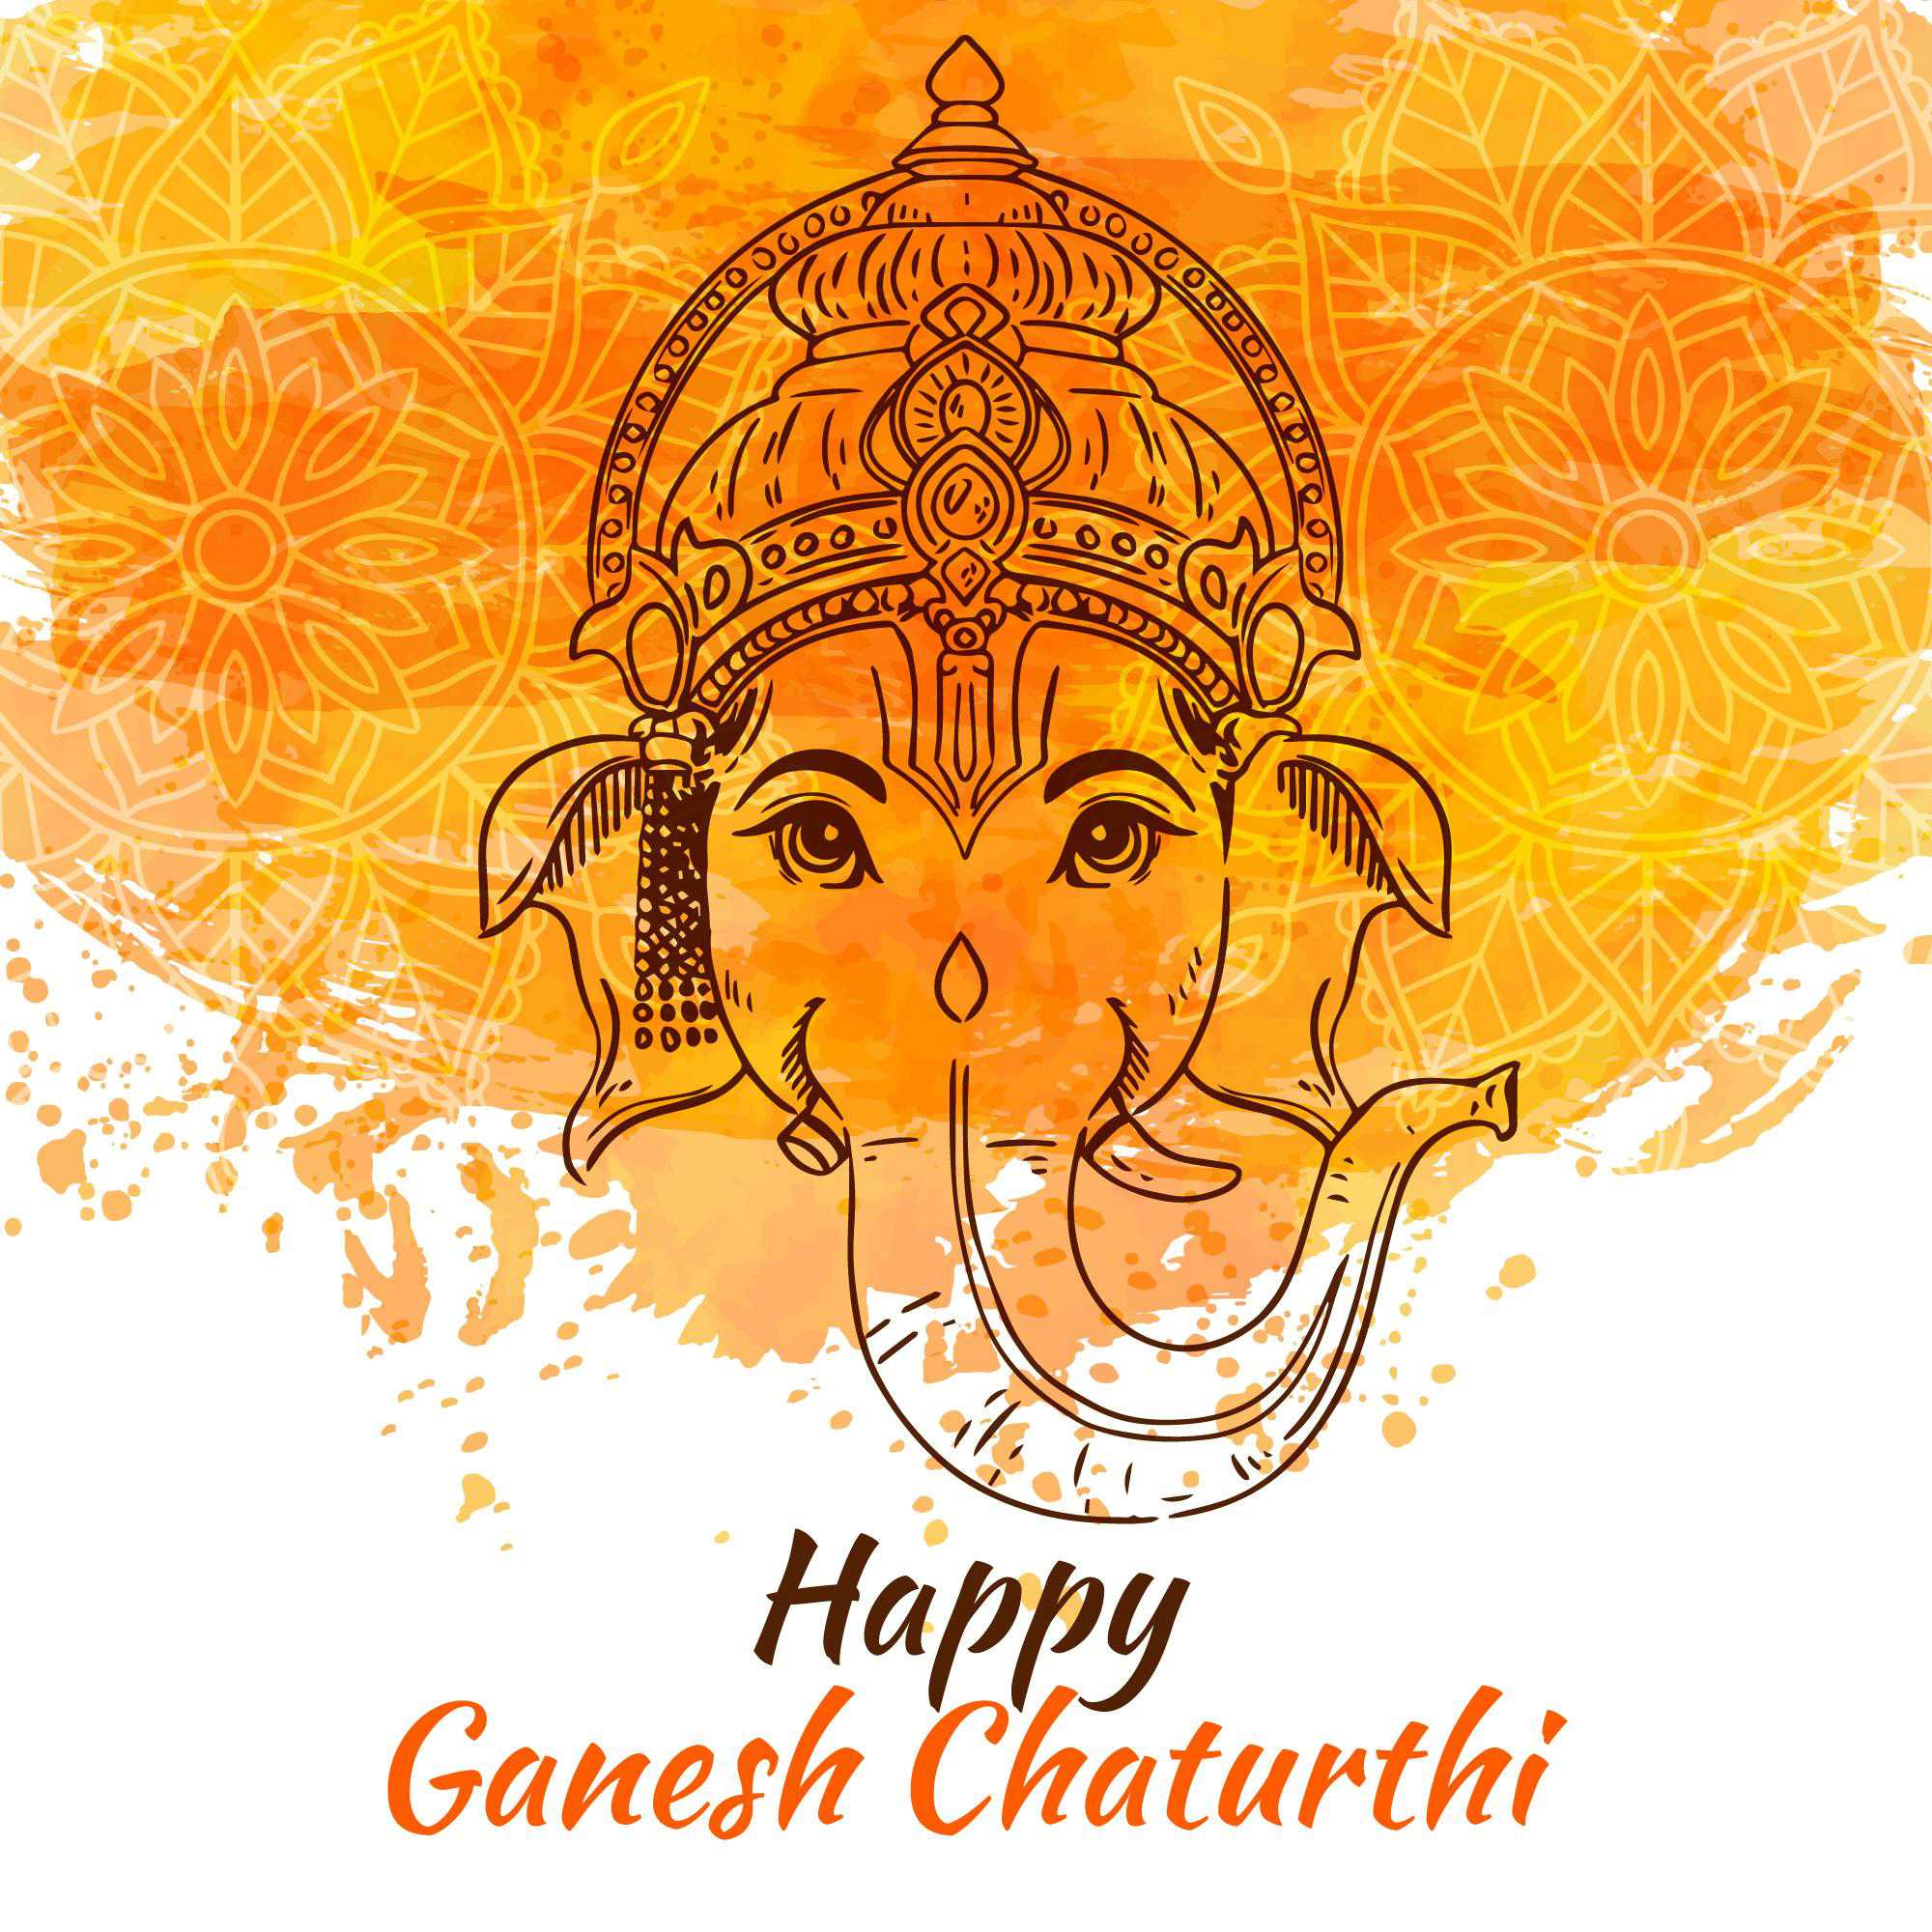 Ganesh Chaturthi pictures download 